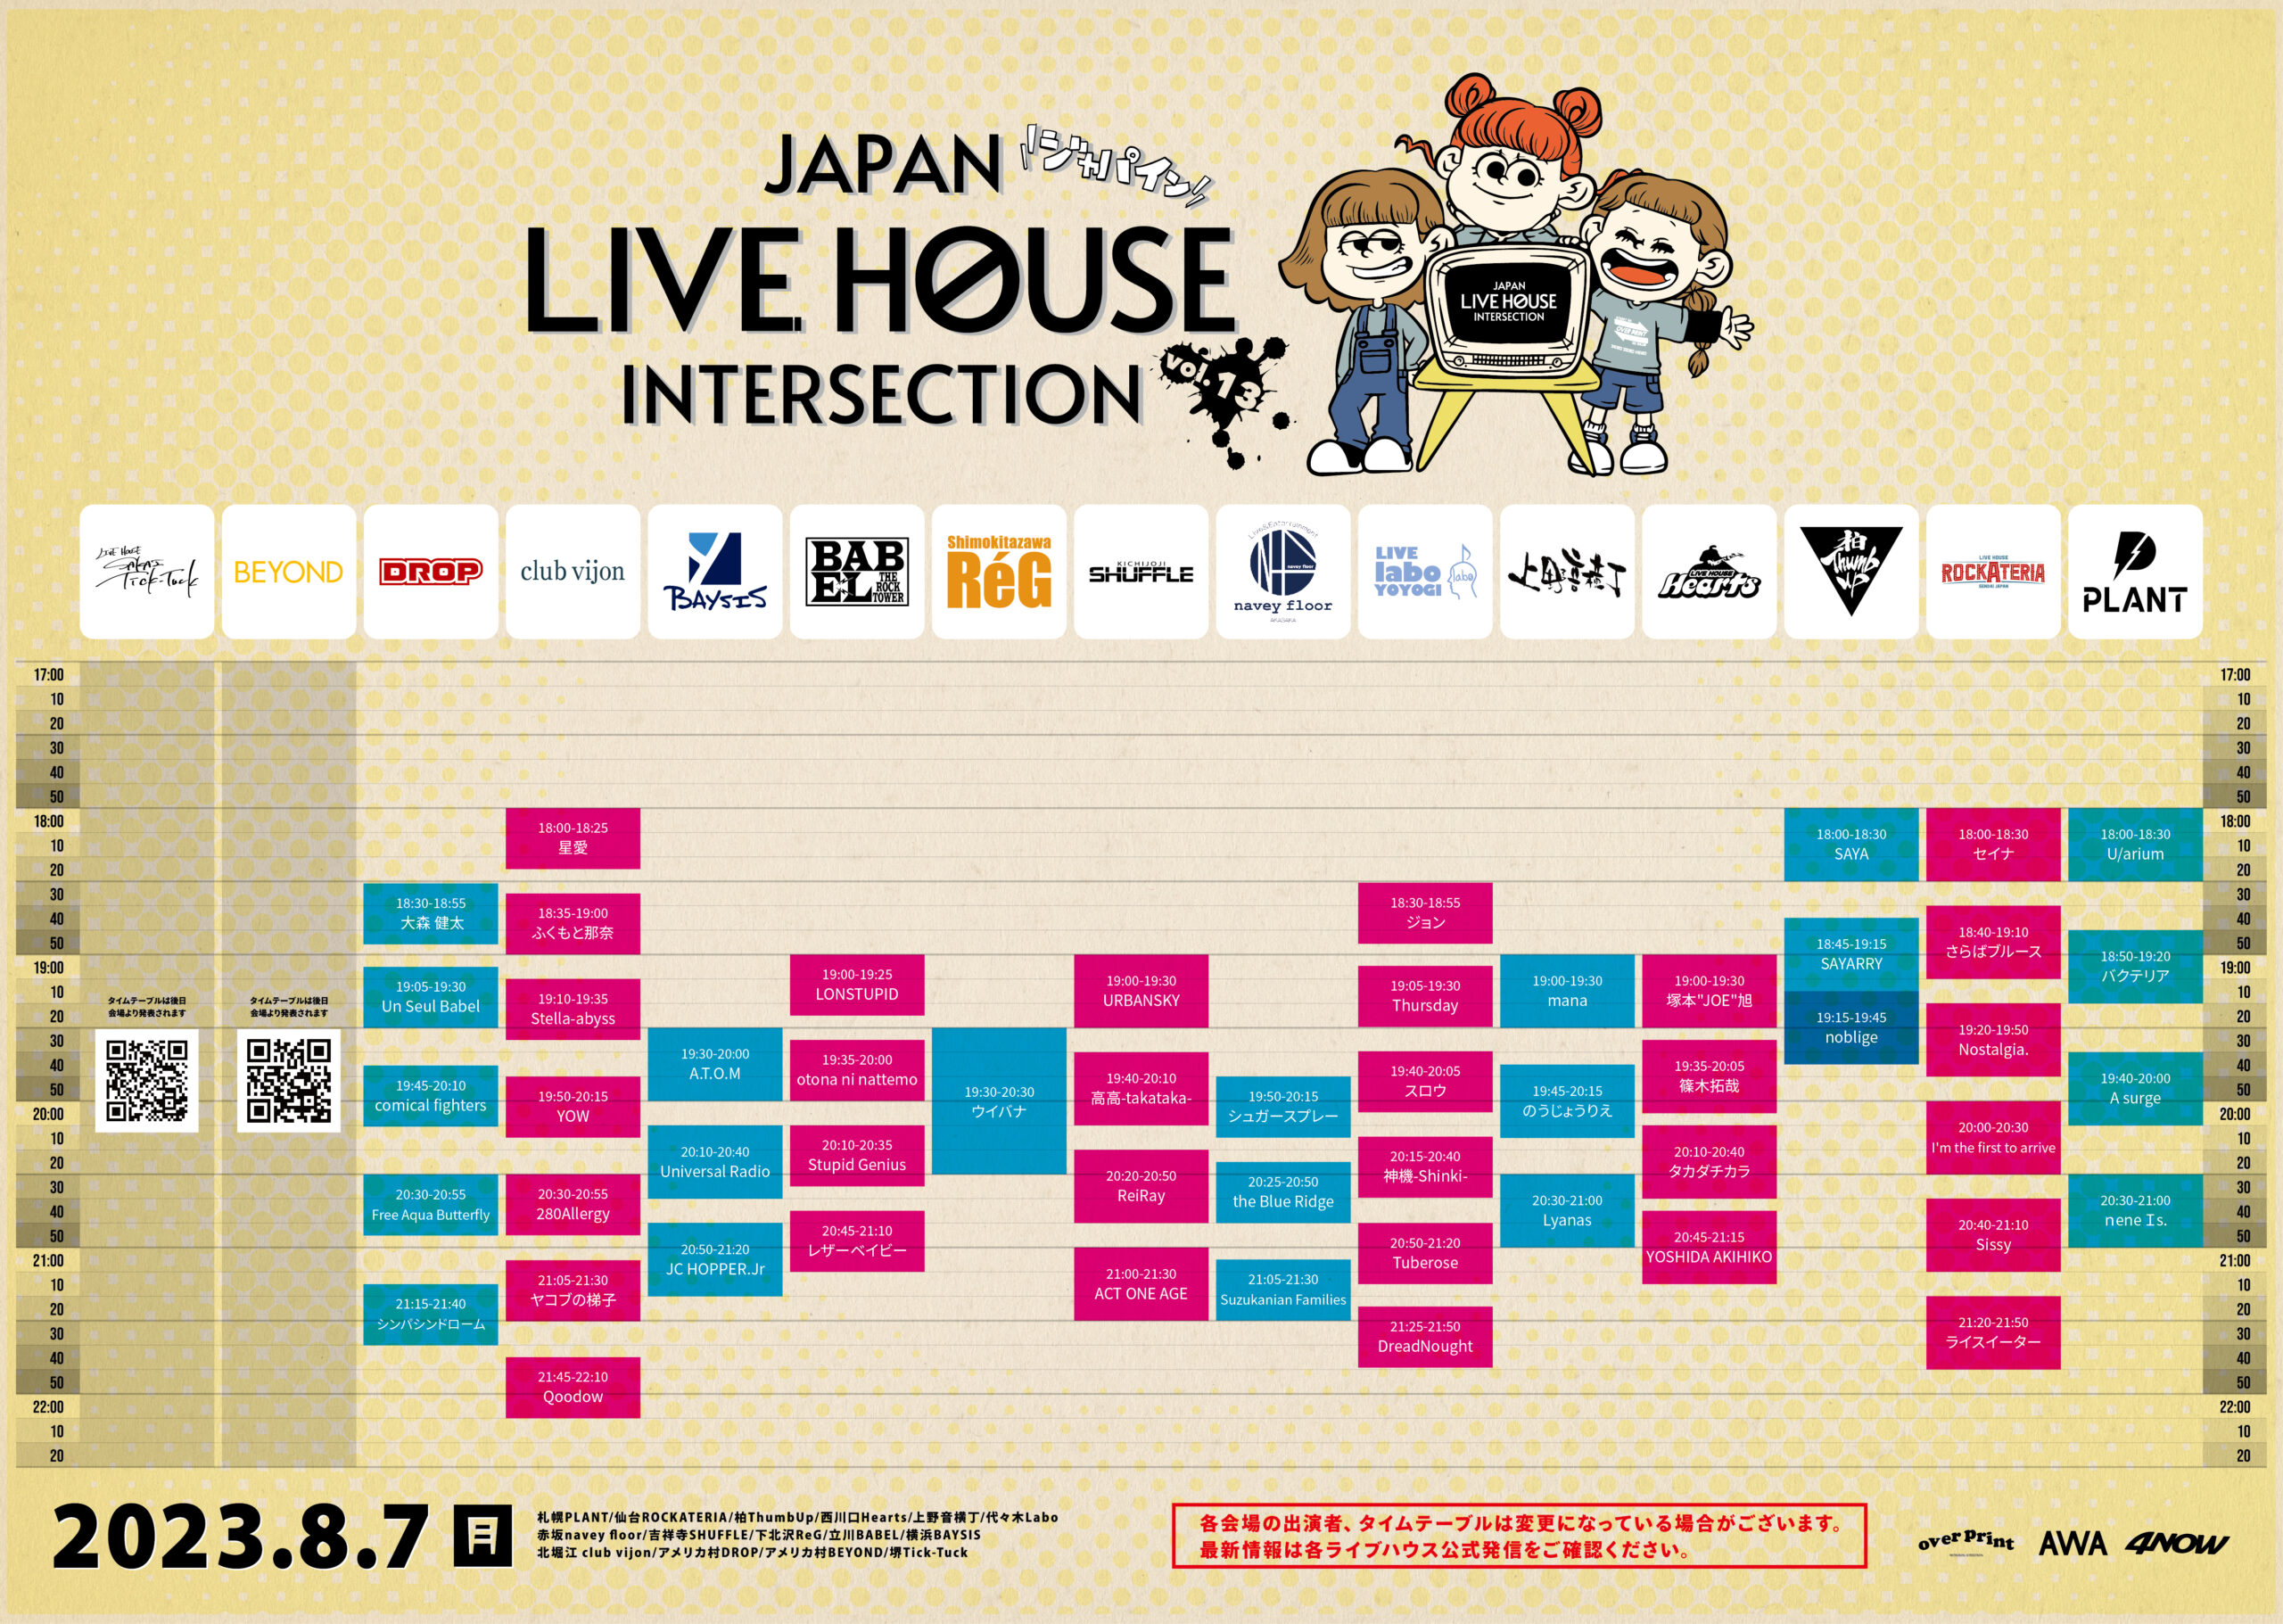 identity with vol.72
-JAPAN LIVE HOUSE INTERSECTION vol.13-